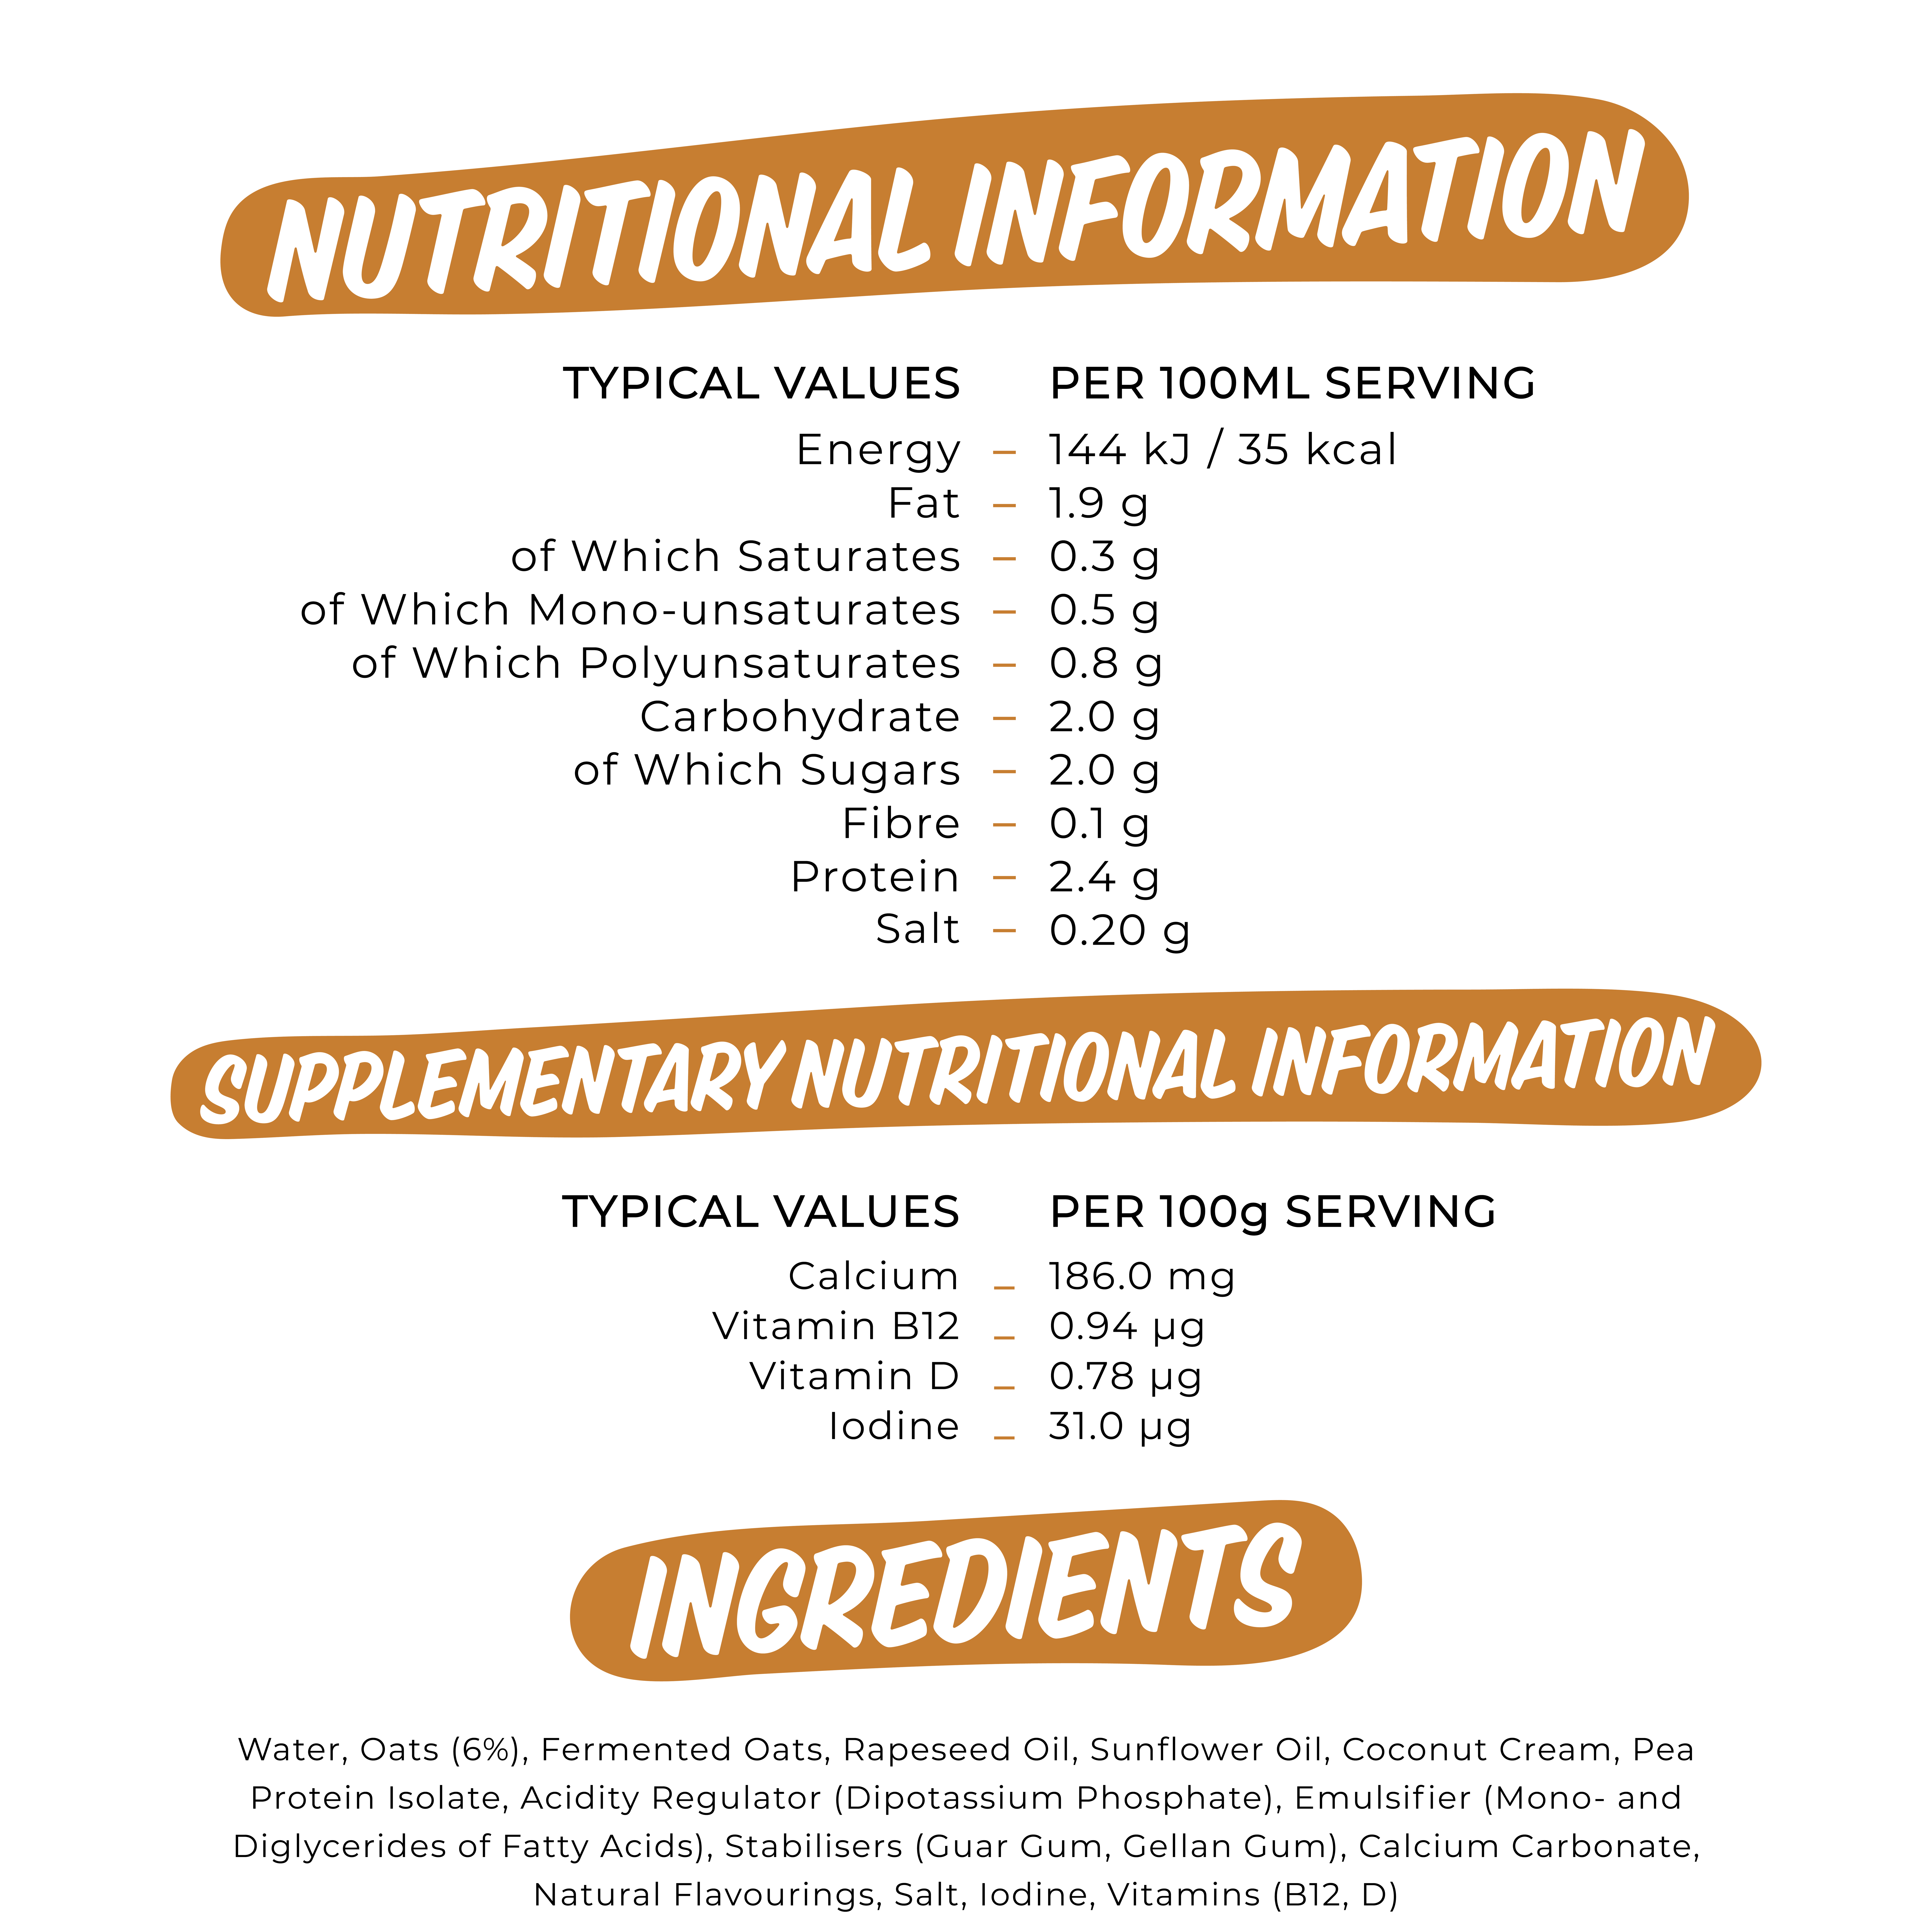  TYPICAL VALUES PER 100ML SERVING 
                          Energy - 144 kJ /35 kcal Fat - 1.9 g 
                          of Which Saturates 
                          of Which Mono-unsaturates 
                          of Which Polyunsaturates 
                          Carbohydrate 
                          of Which Sugars 
                          Fibre 
                          Protein 
                          Salt 
                          _ 0.3 g _ as g . 0.8 g _ 2.0 g 
                          _ 2.0 g _ 01 g _ 2.4 g . 0.20g 

                          TYPICAL VALUES 
                          Calcium 
                          Vitamin B12 
                          Vitamin D 
                          Iodine 
                          PER 100g SERVING 186.0 mg O.94 pg O.78 pg 
                          31.0 pg 

                          Water, Oats (6%), Fermented Oats, Rapeseed Oil, Sunflower Oil, Coconut Cream, Pea Protein Isolate, Acidity Regulator (Dipotassium Phosphate), Emulsifier (Mono- and 
                          Diglycerides of Fatty Acids), Stabilisers (Guar Gum, Gellan Gum), Calcium Carbonate, 
                          Natural Flavourings, Salt, Iodine, Vitamins (B12, D)